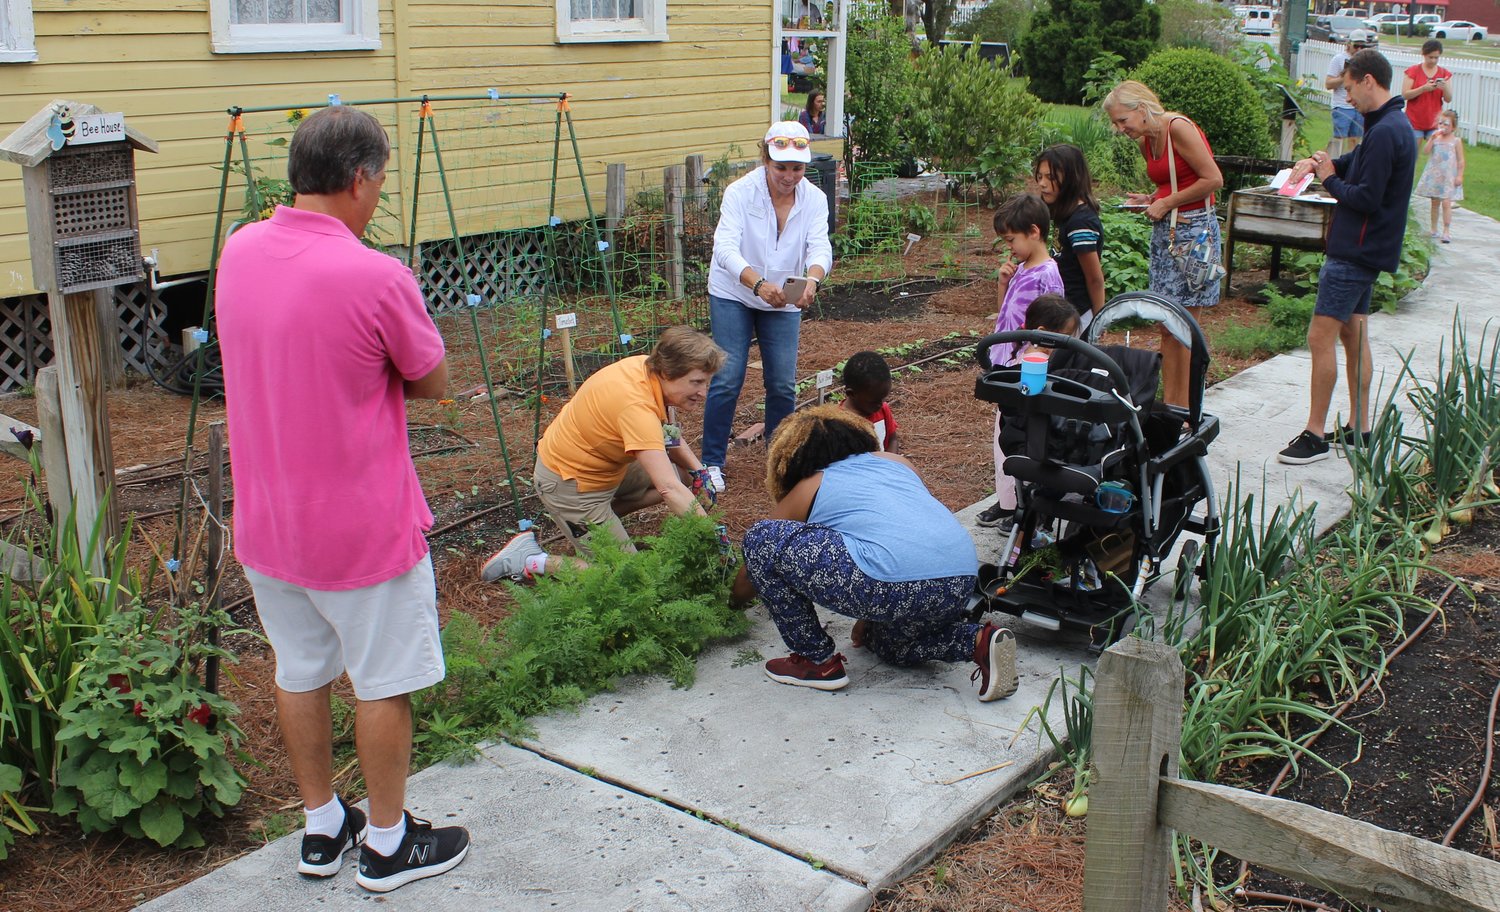 Visitors were encouraged to dig their own carrots out of the vegetable garden, which replicates a 1920 kitchen garden and helps people better understand the history of edible landscape and sustainable garden practices.